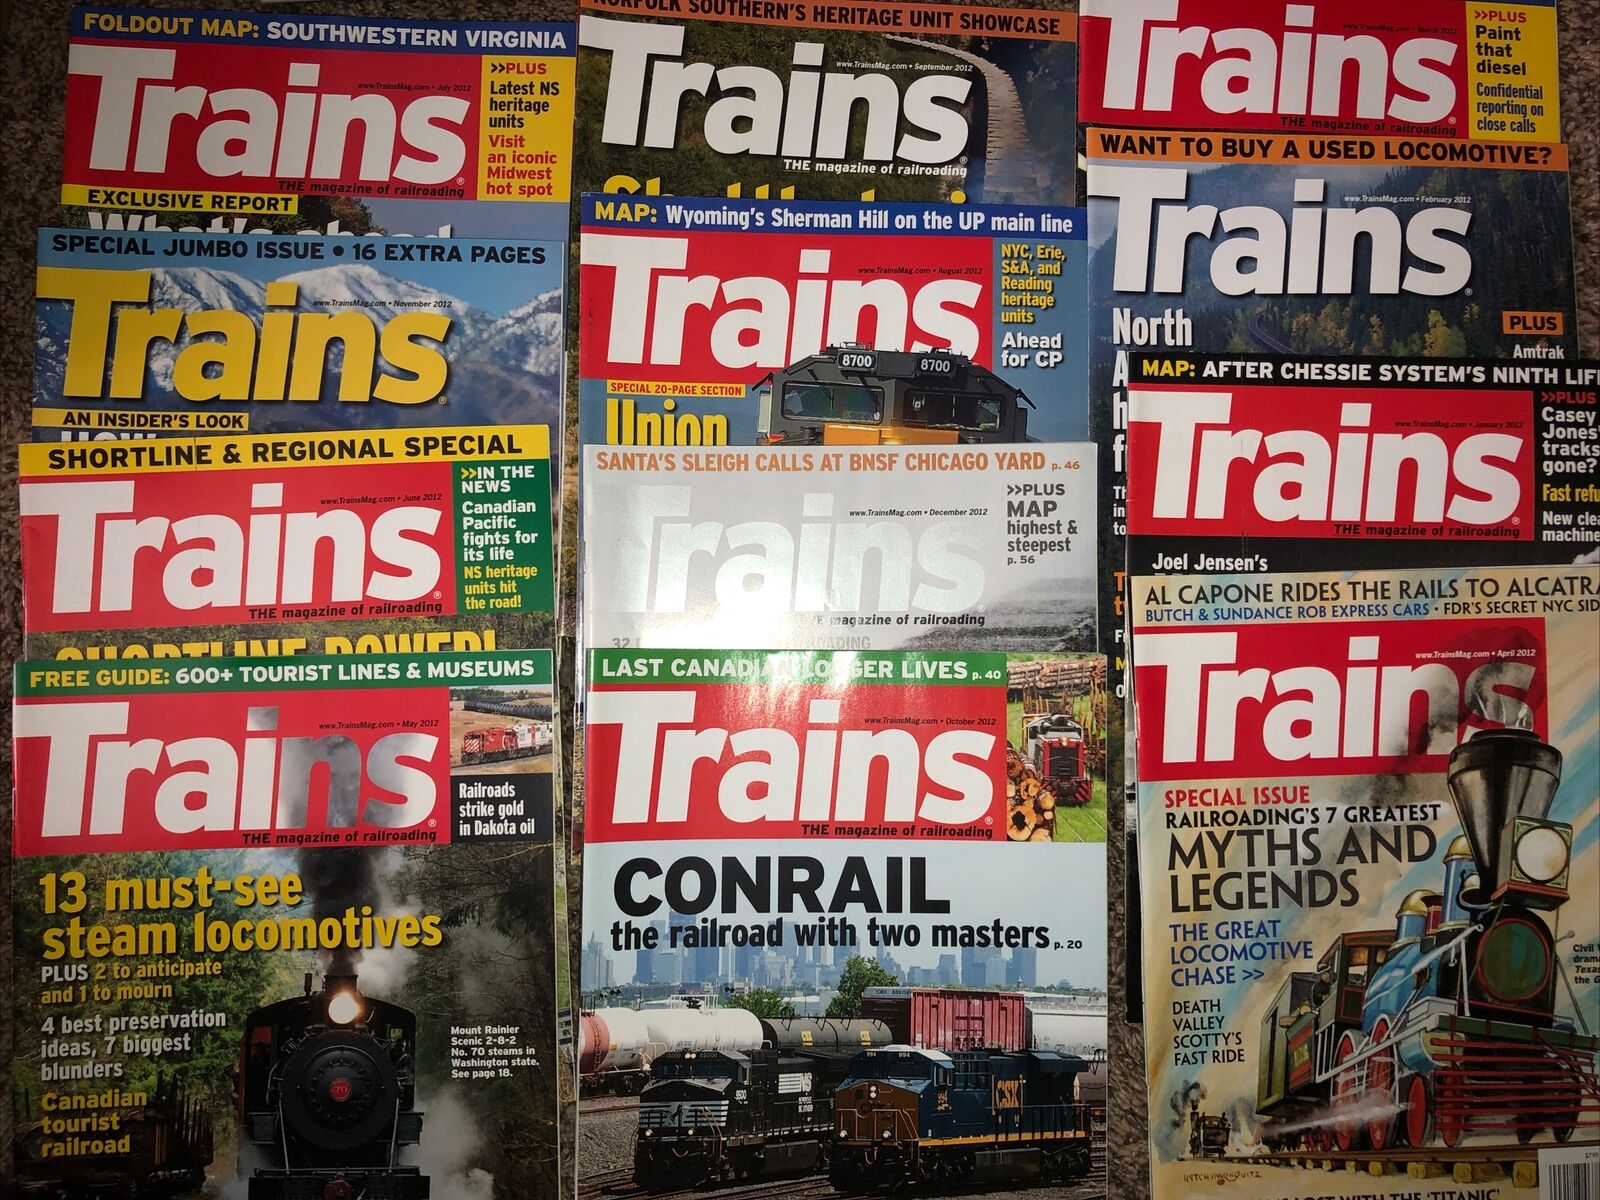 Trains 2012 Magazine 12 Issues January February March April May June July Aug